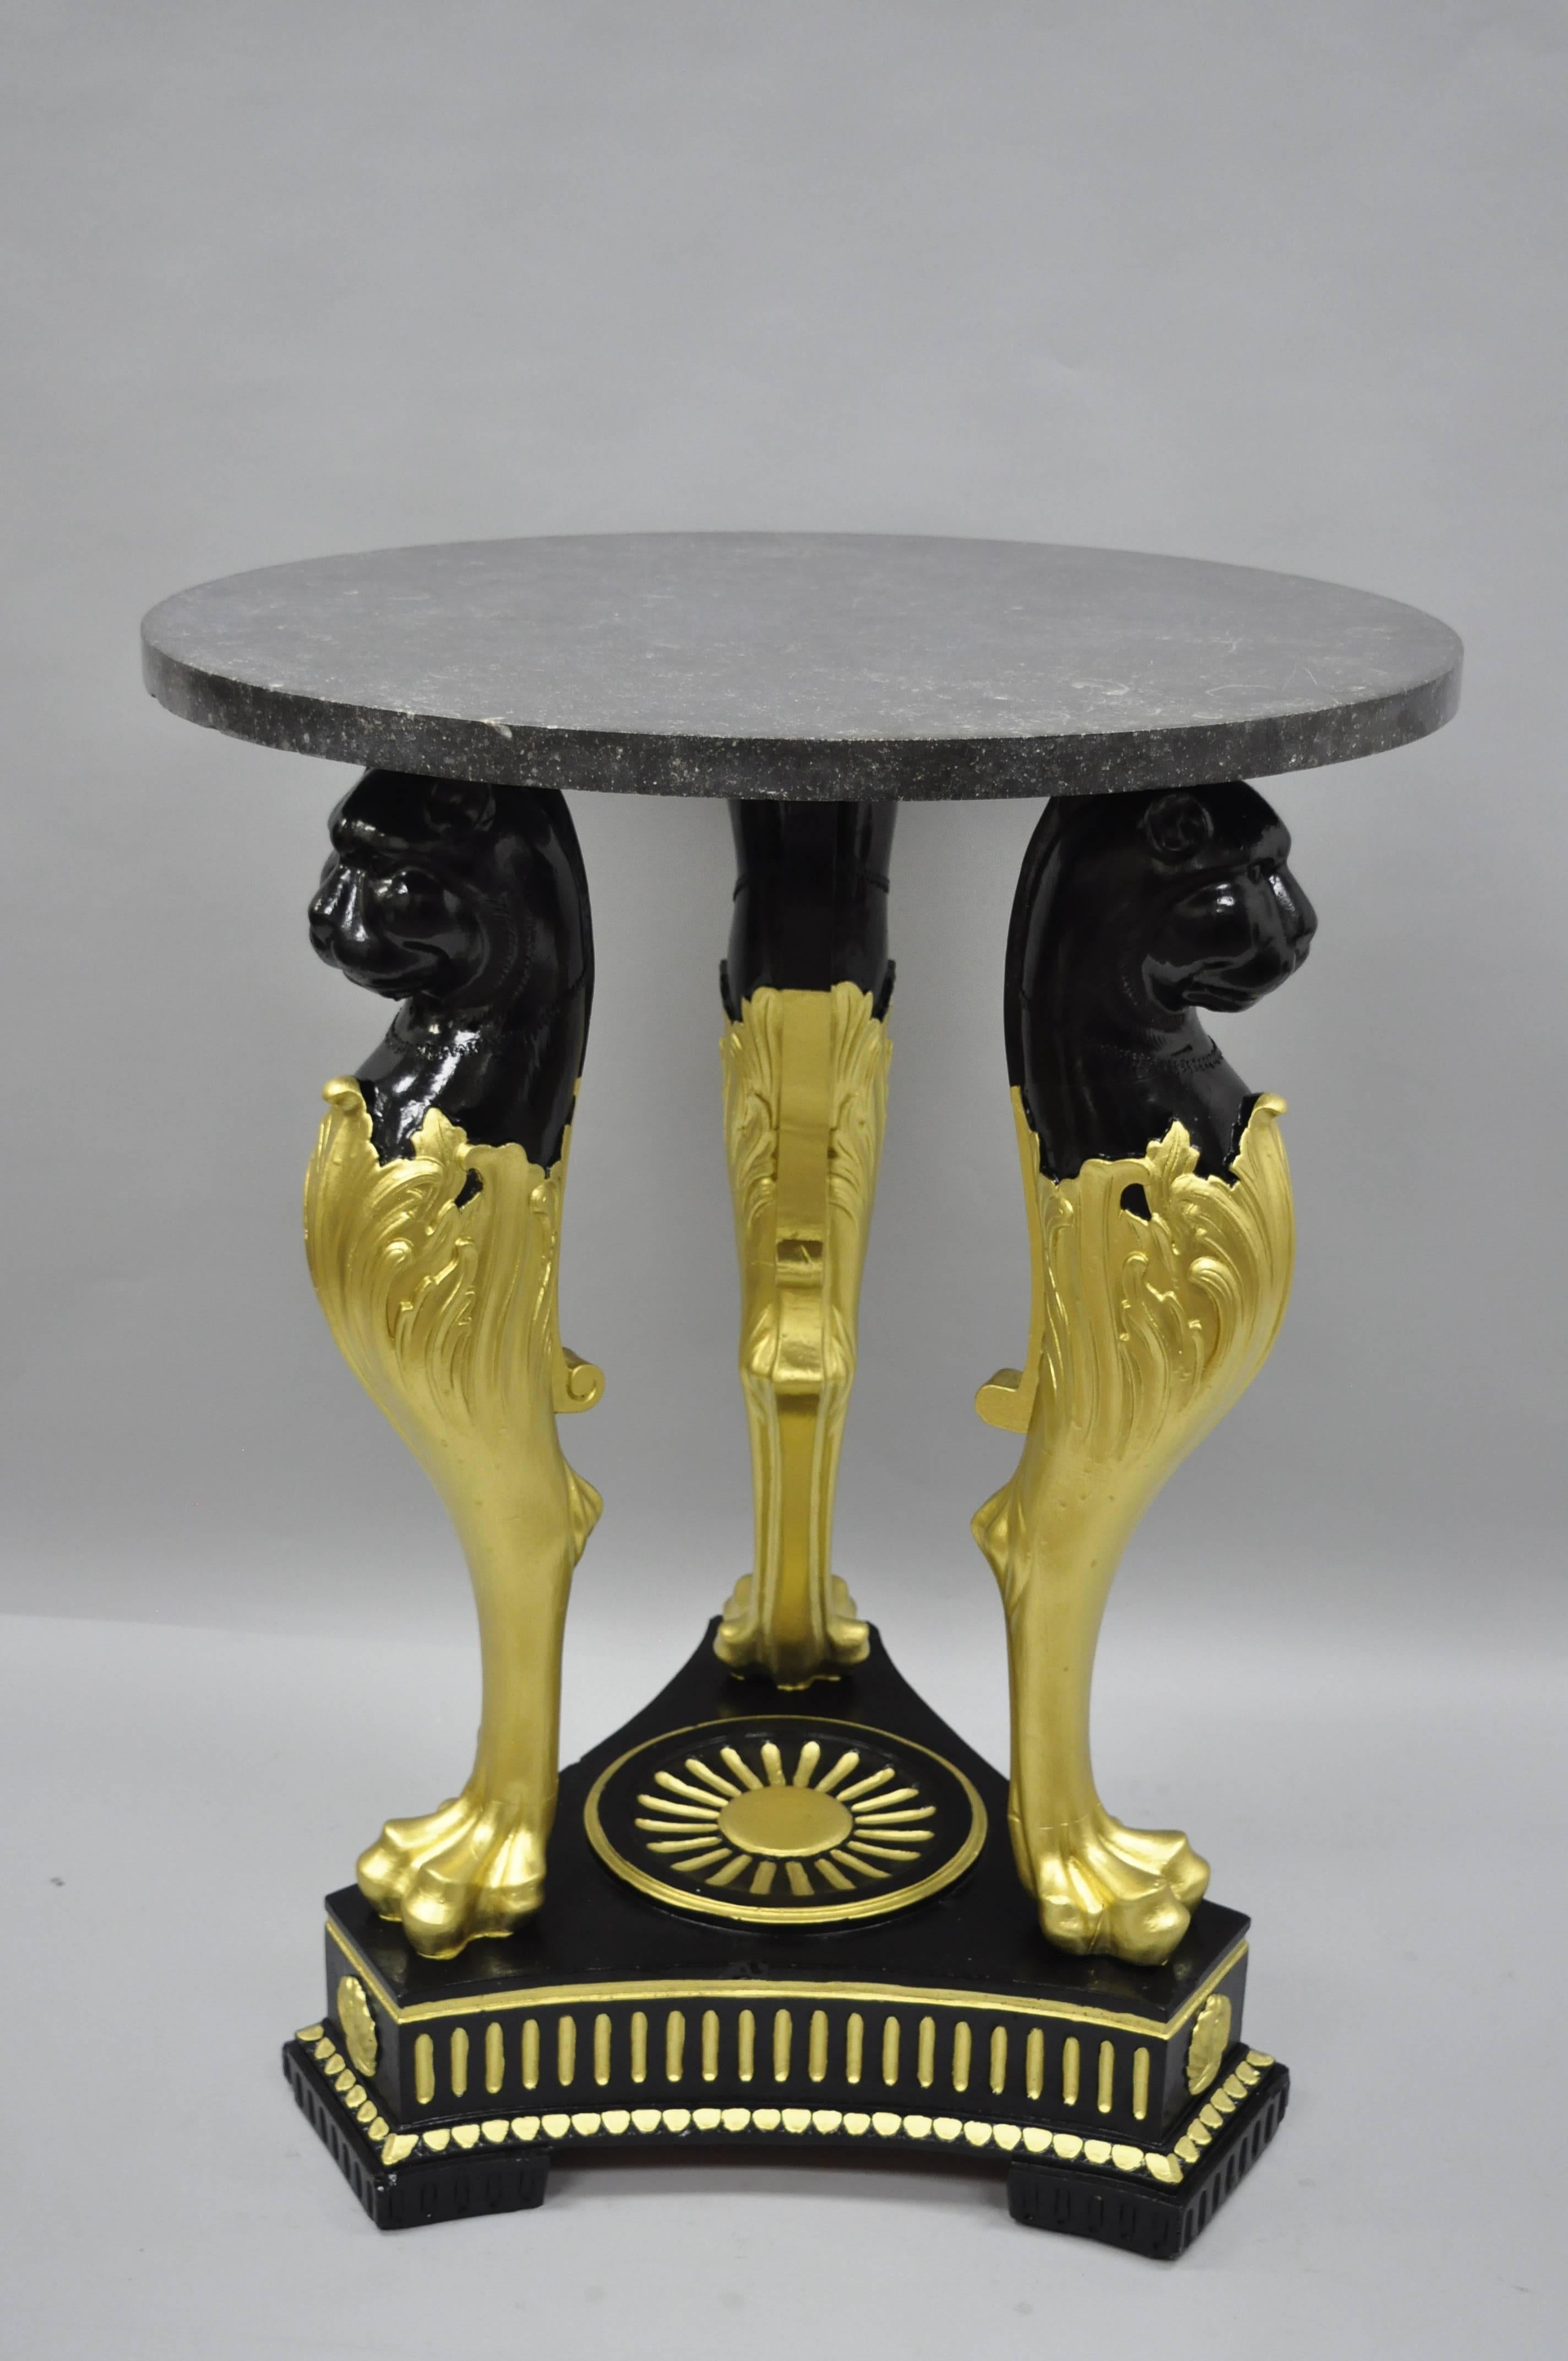 Large pair of terracotta French Empire style black and gold figural tables with round granite tops. Item features very impressive triple lion, paw foot, solid terracotta bases, black and gold painted finish, and round granite stone tops. Tables